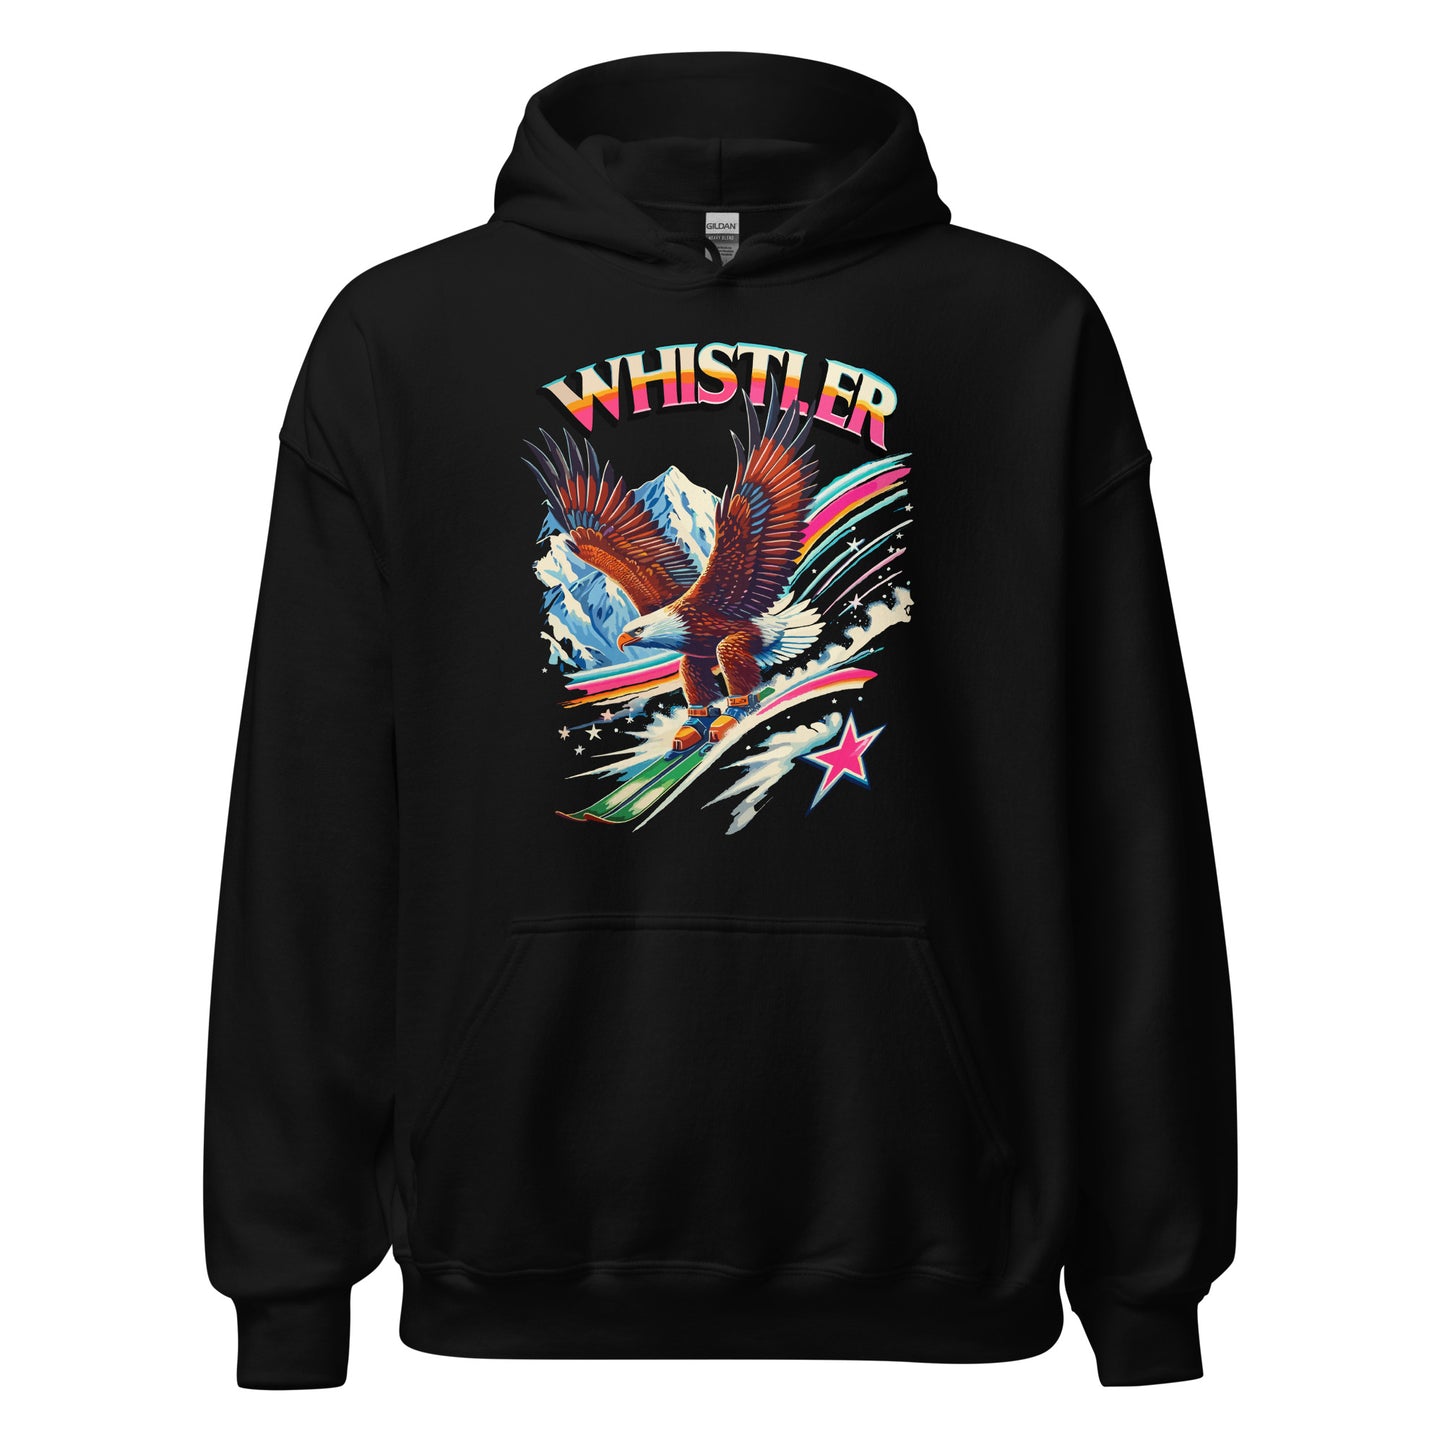 Whistler eagle skiing hoodie printed by Whistler Shirts